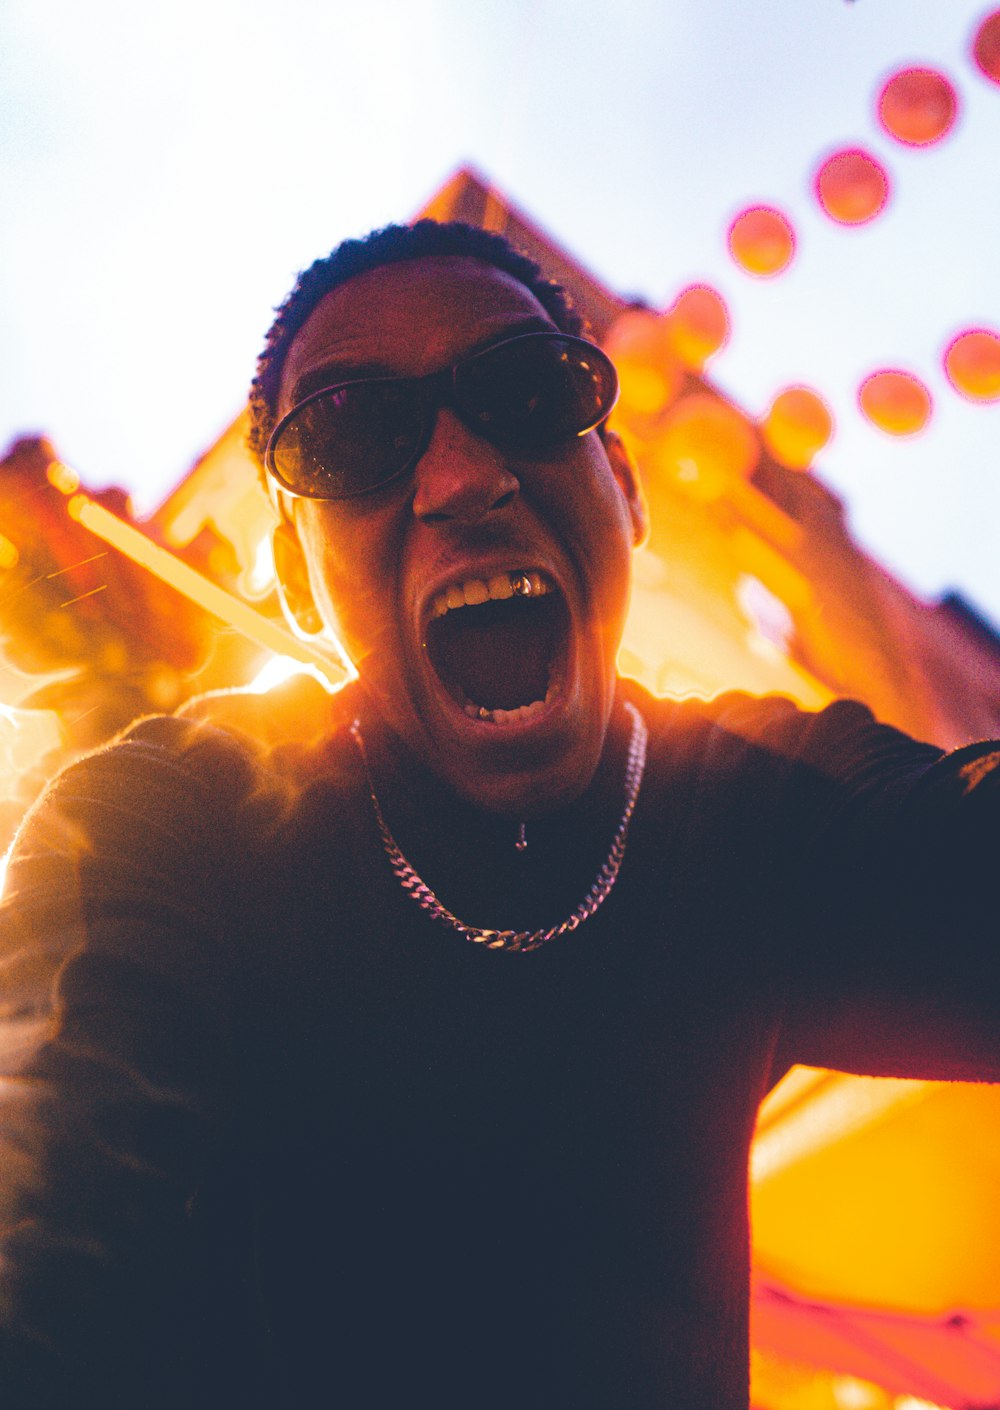 a man wearing sunglasses and a necklace screaming